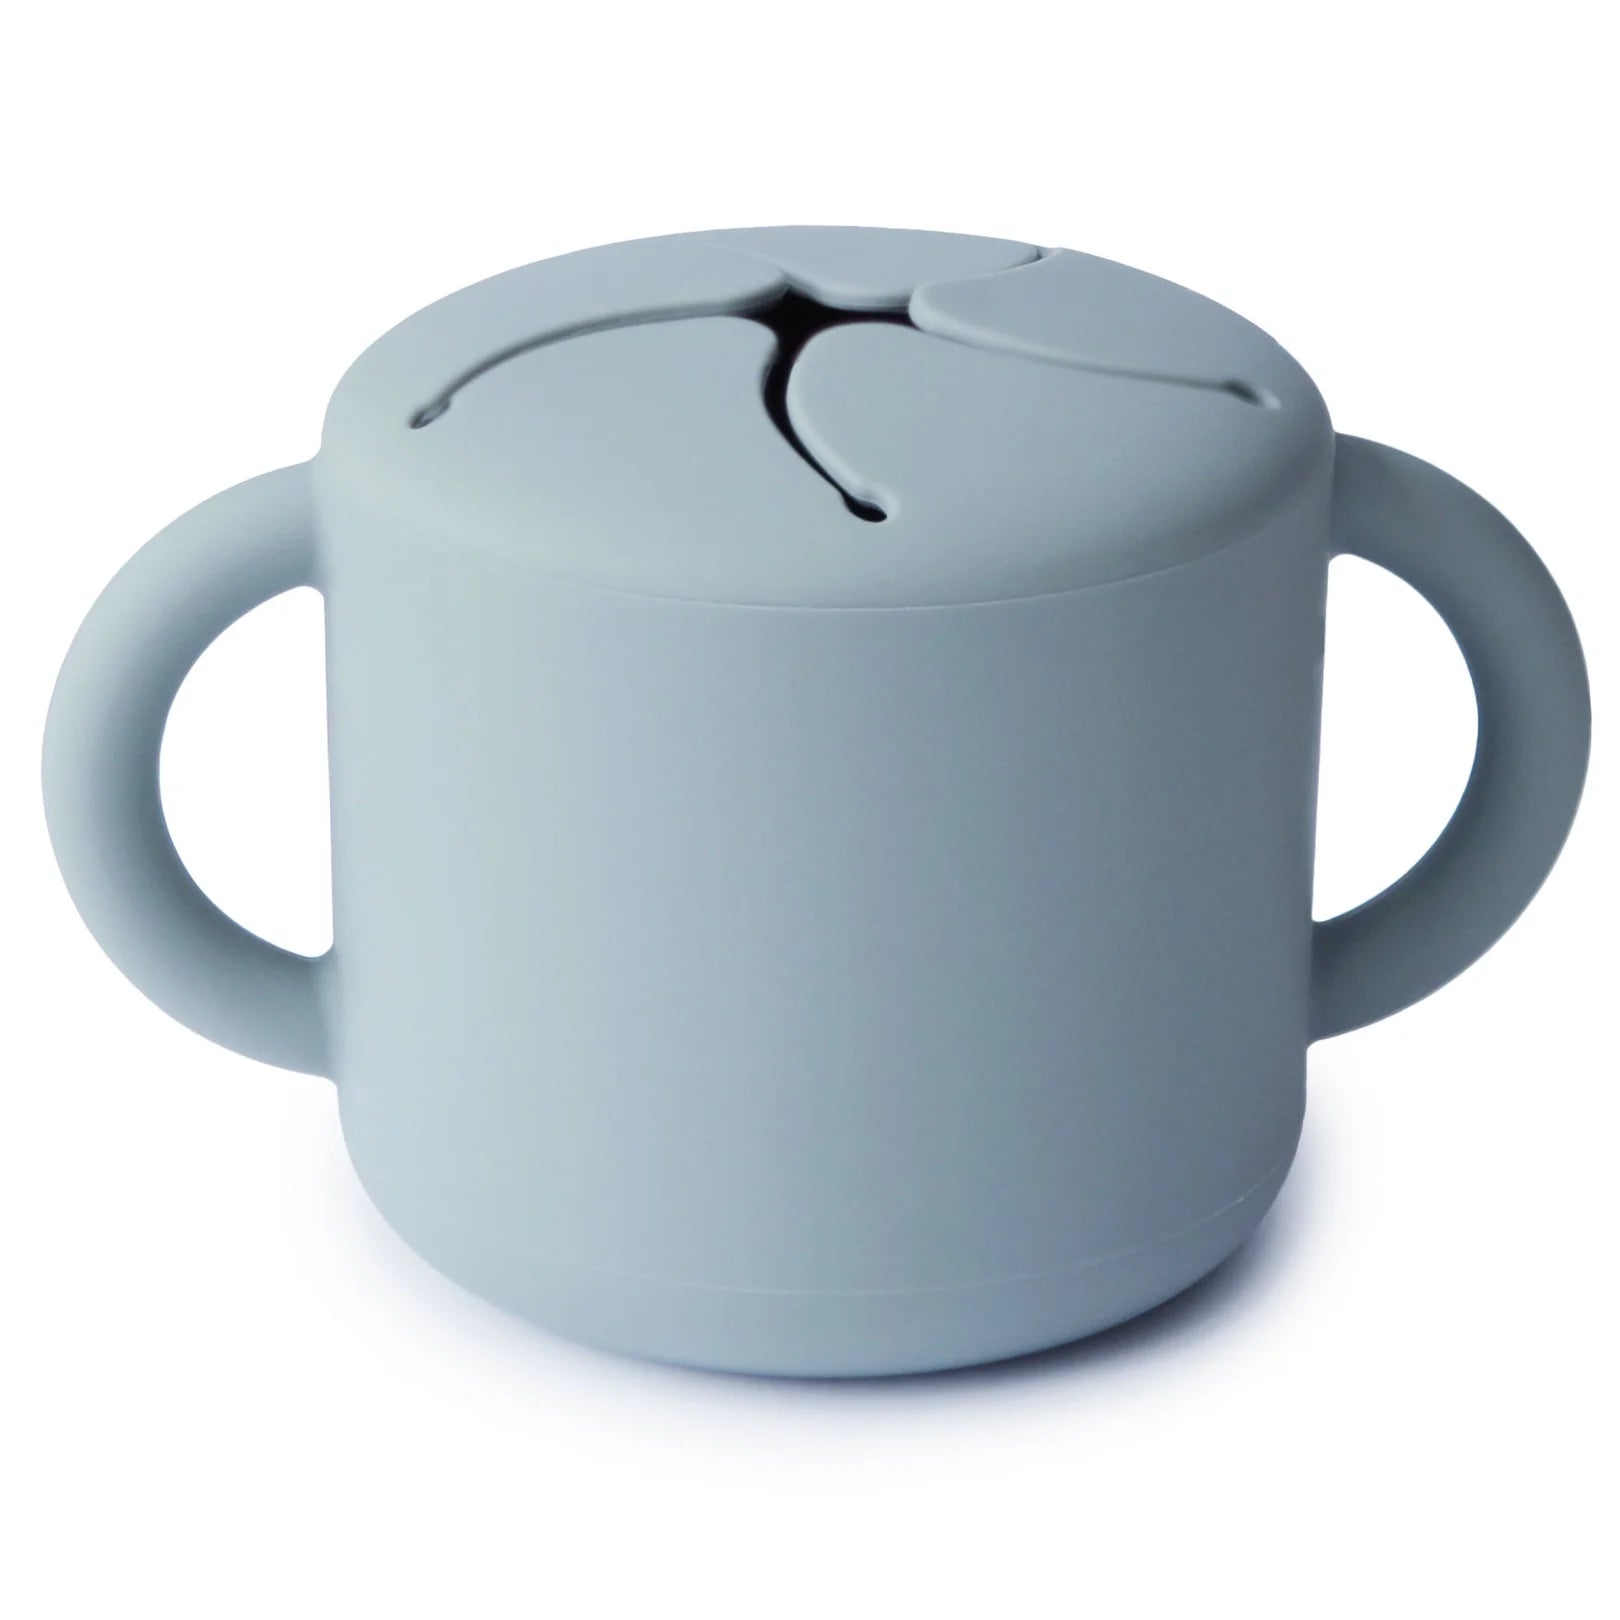 MUSHIE - Snack Cup - Powder Blue